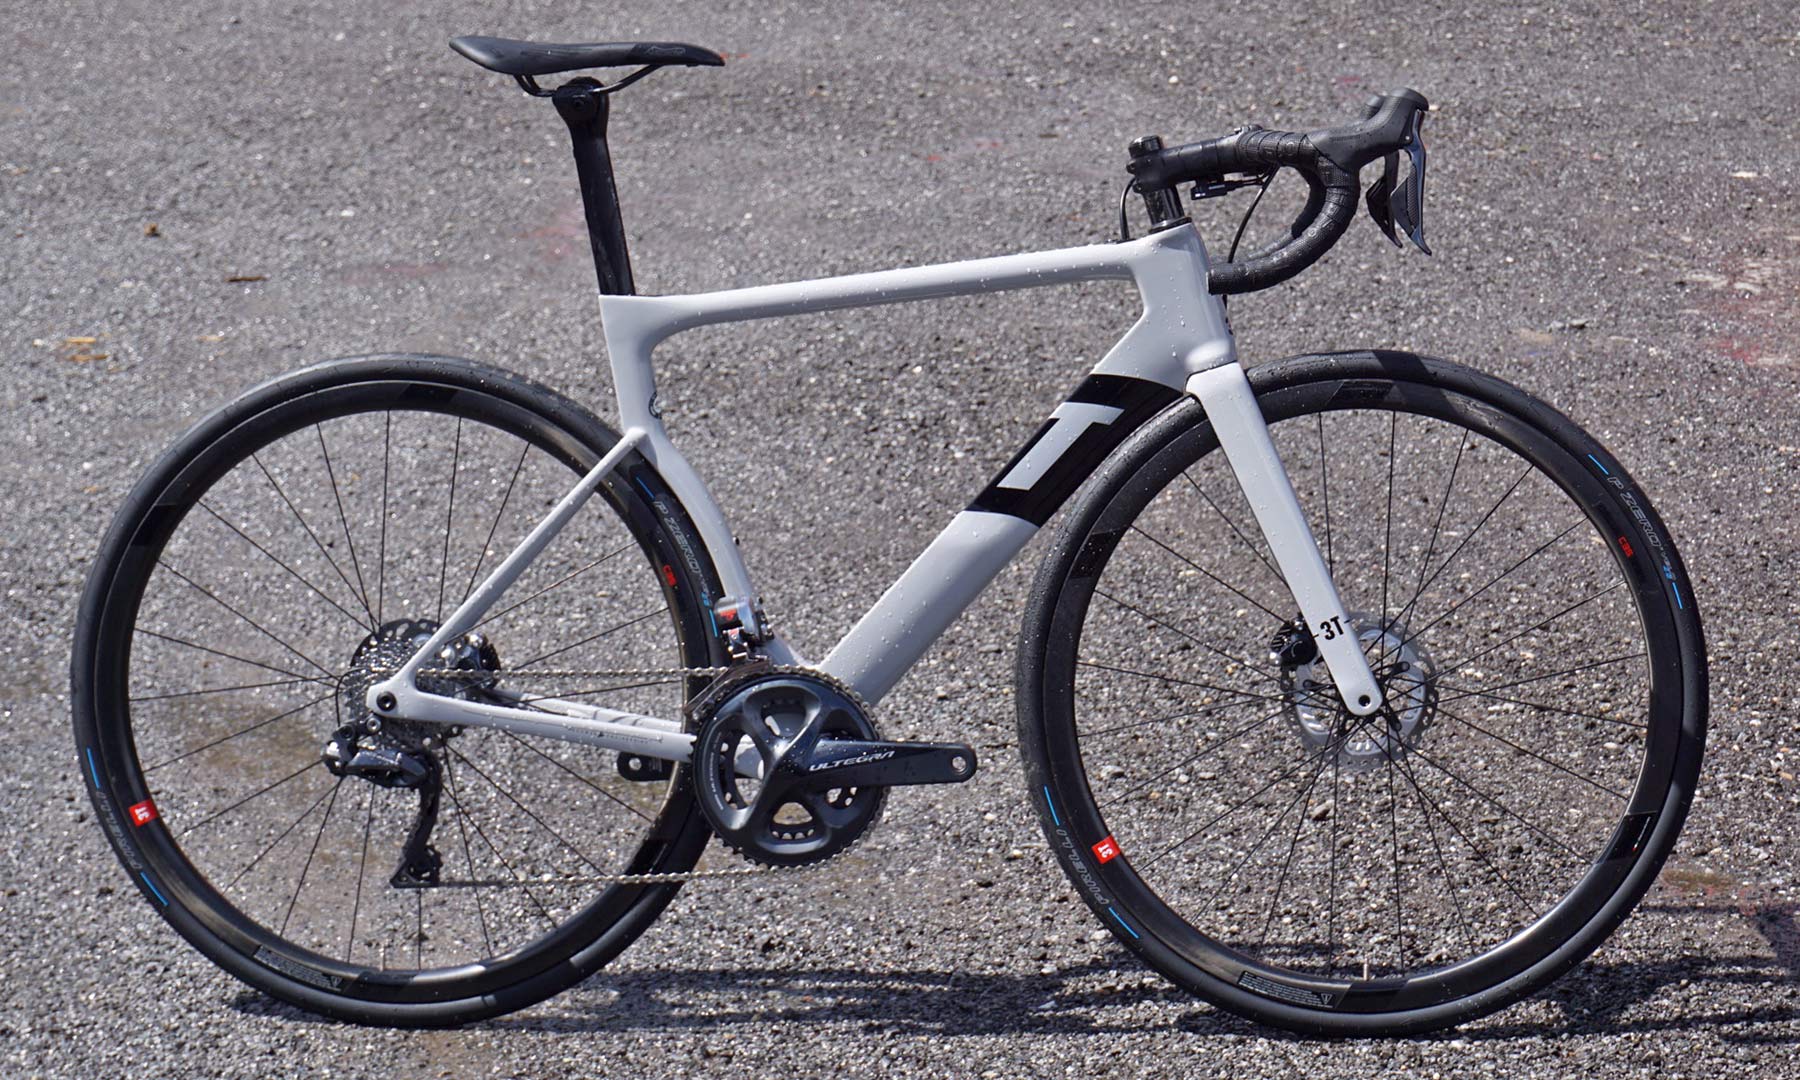 3T Strada Due adds front derailleur to fat tire aero road bike, by popular demand!